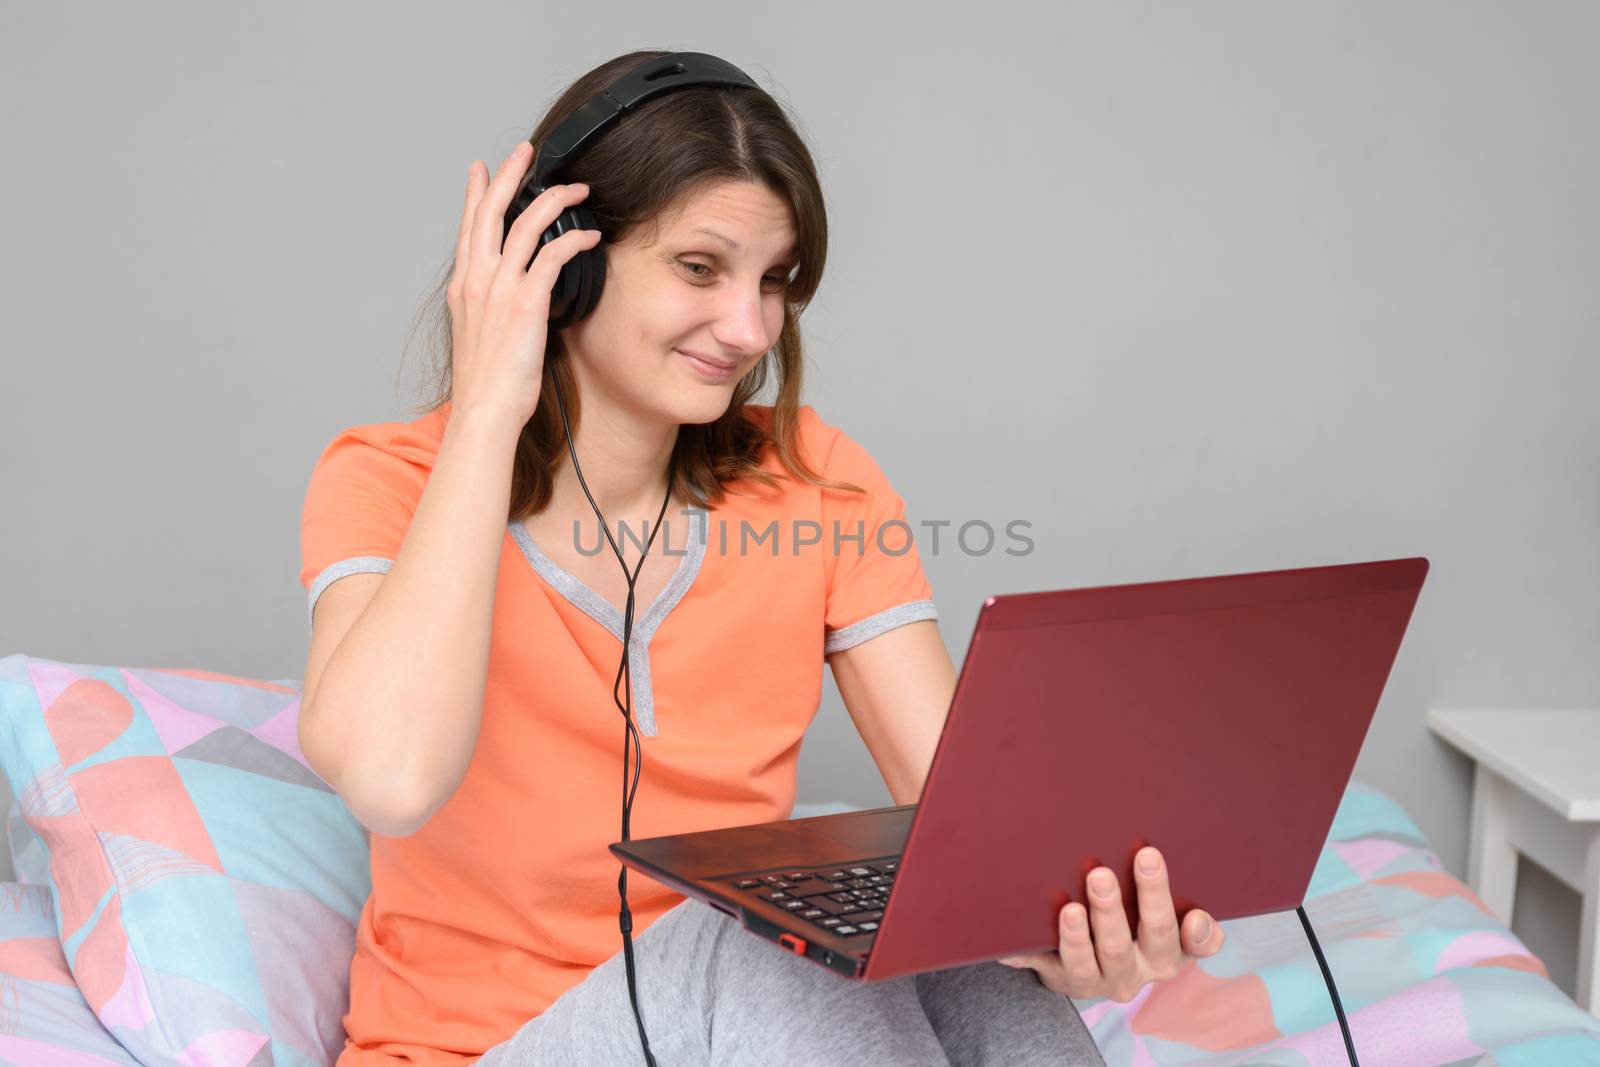 Girl straightens headphones while sitting on bed with laptop